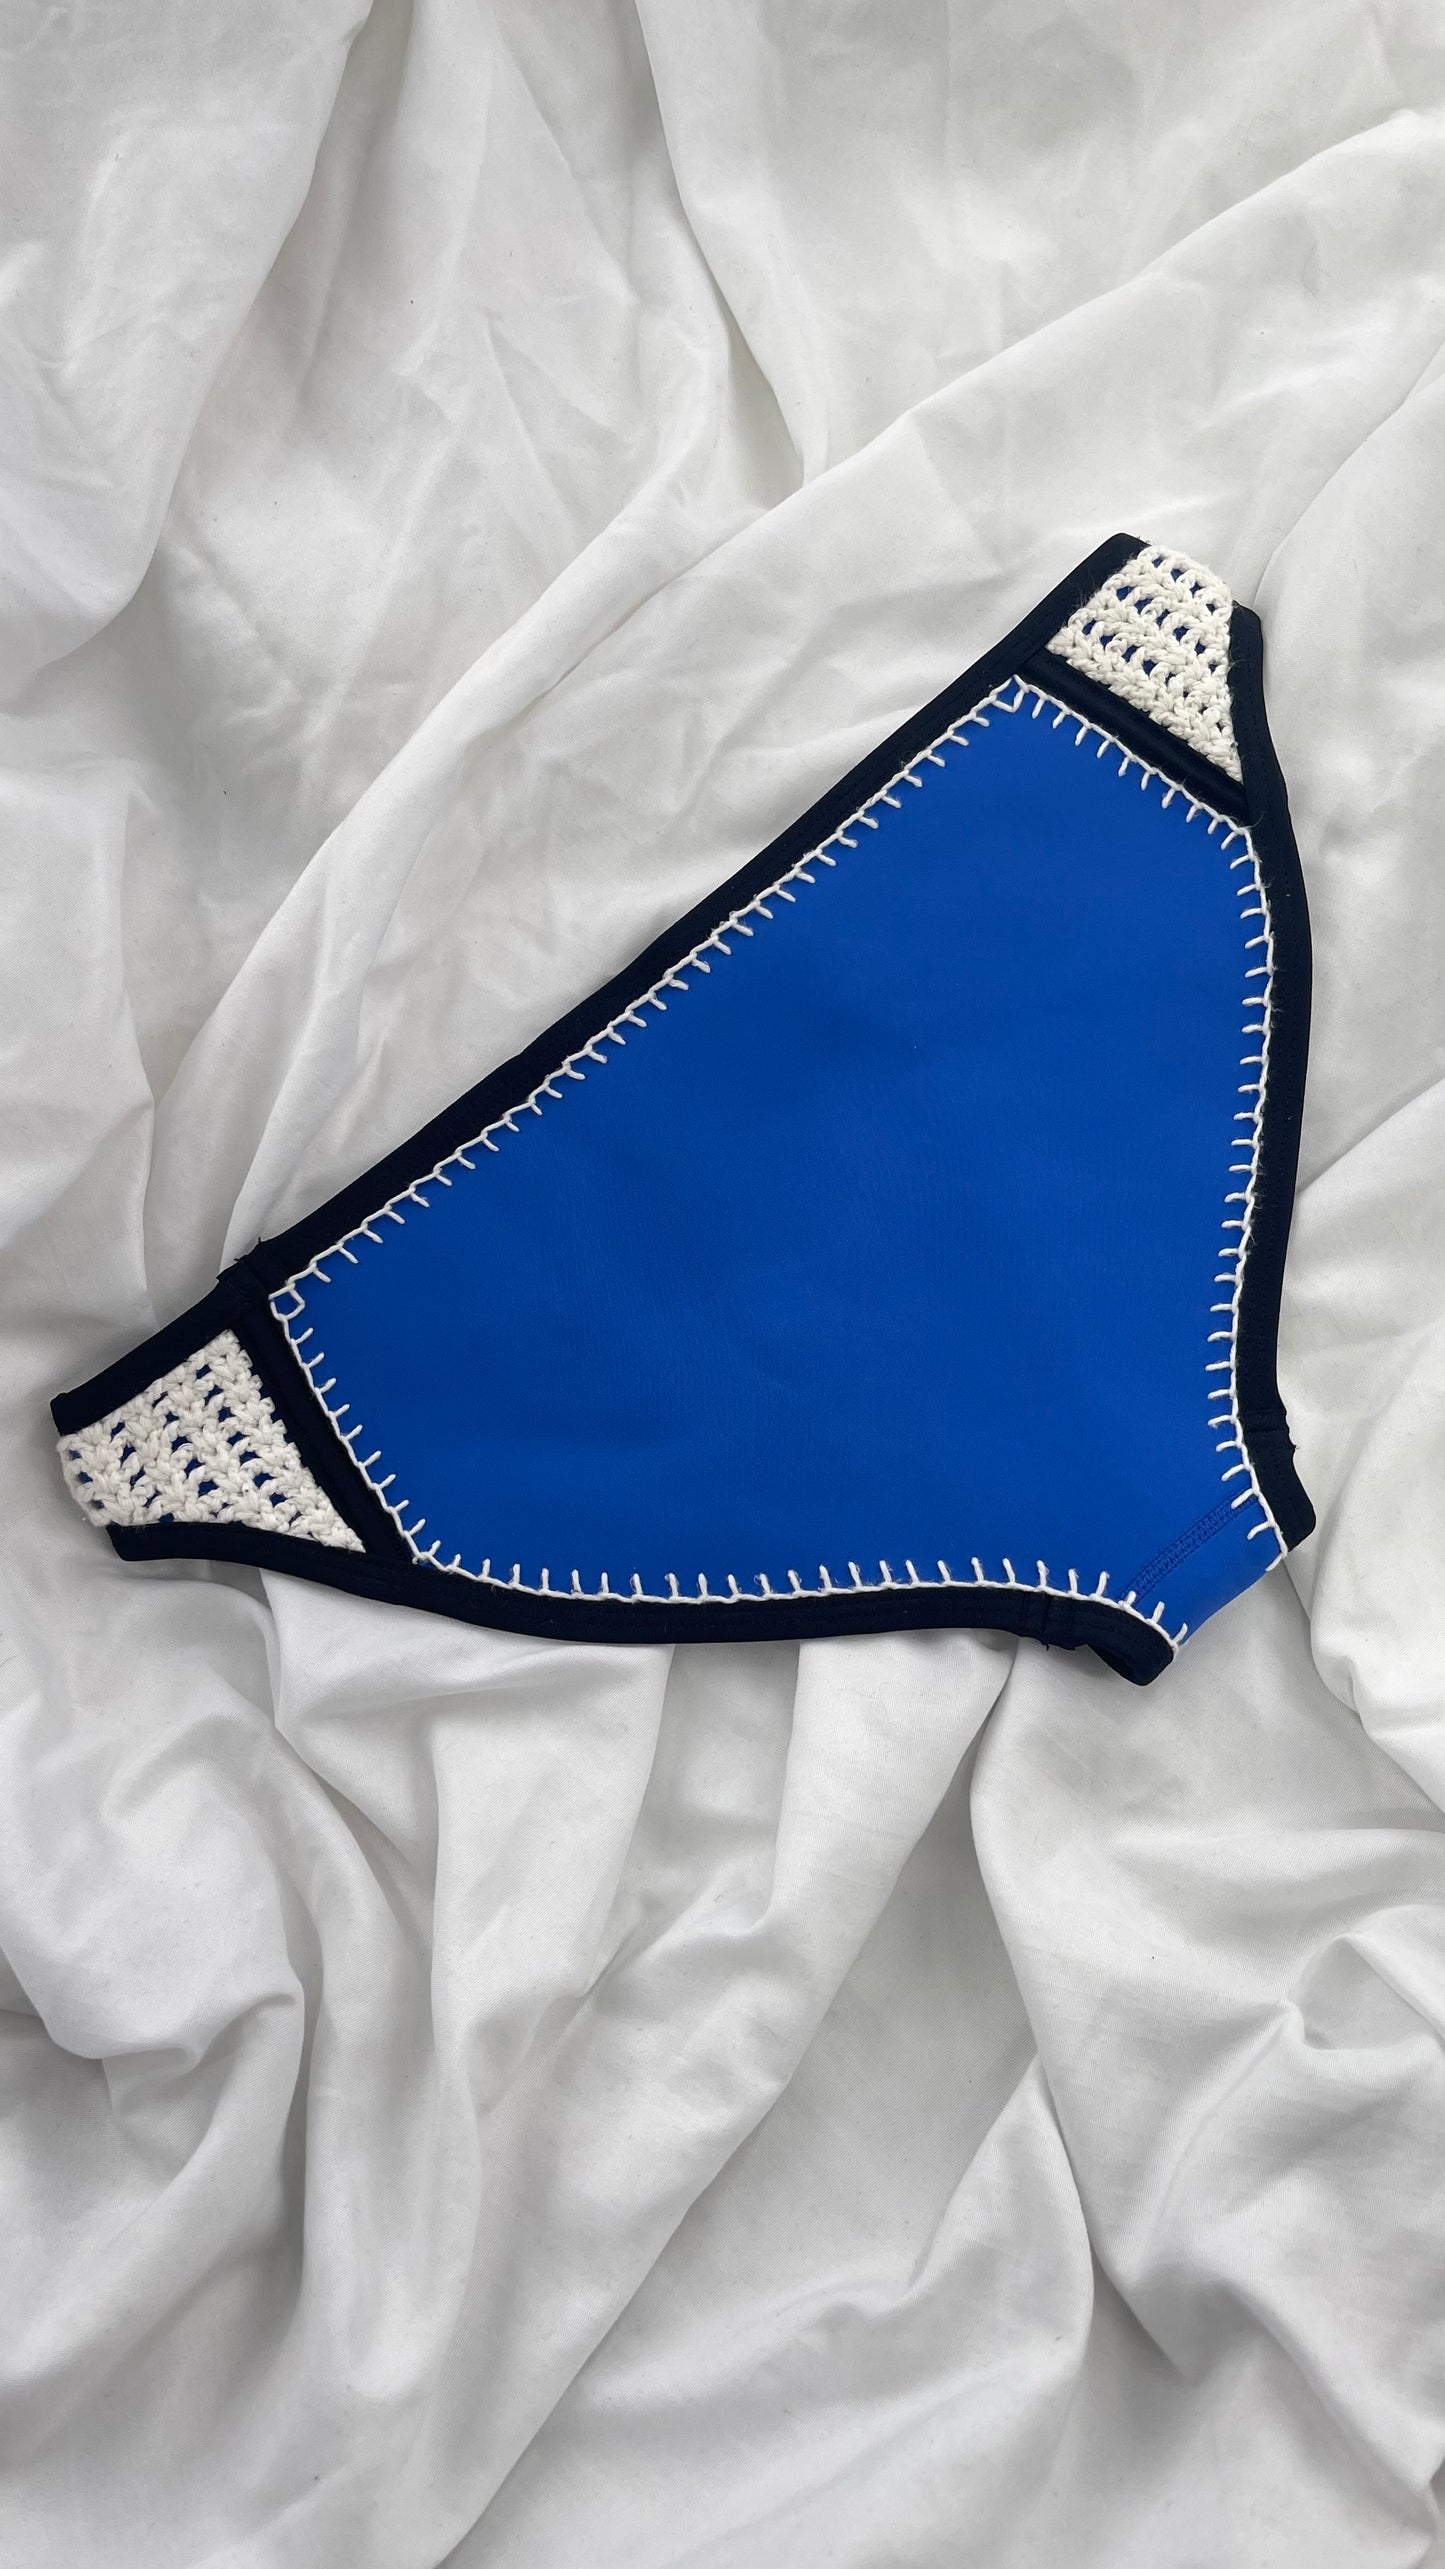 TRIANGL Swim Royal Blue and Black Neoprene Swim Bottoms with Crochet Sides (Small)